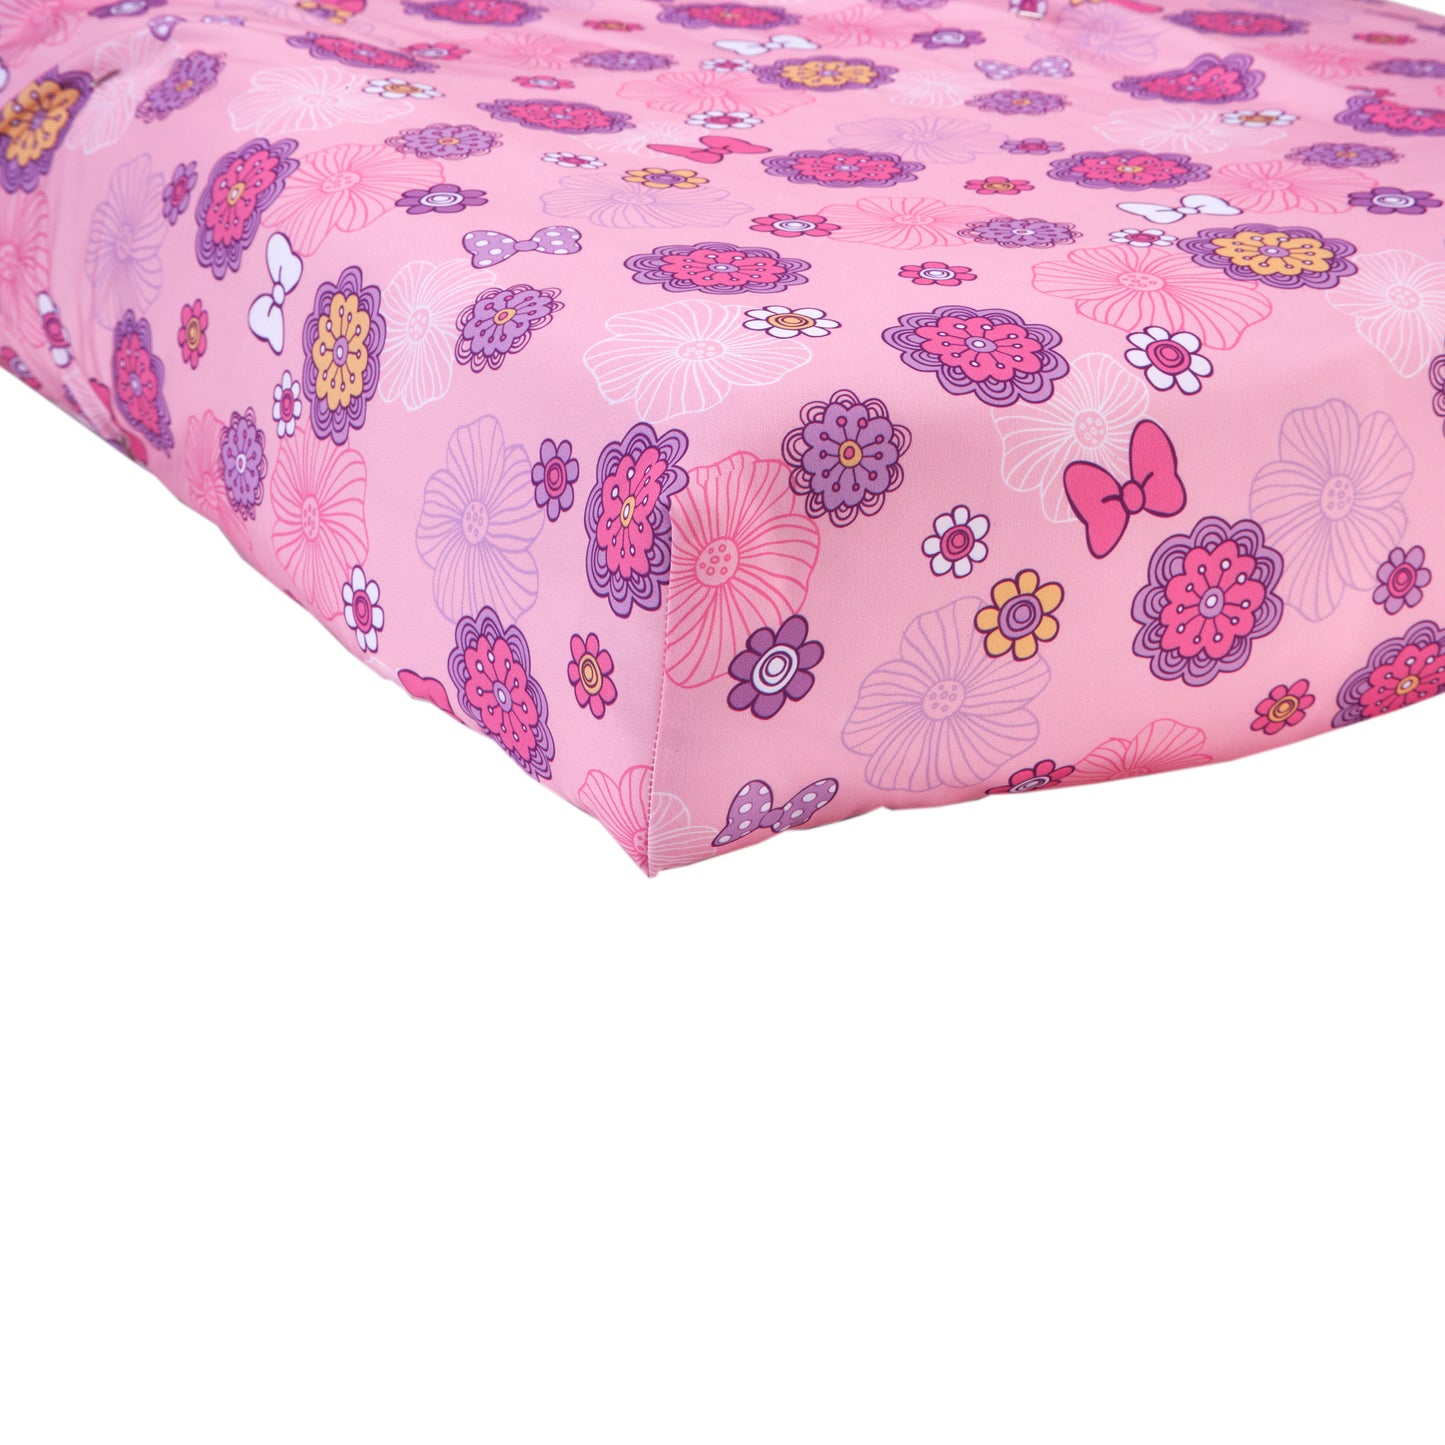 Disney Minnie Mouse Fluttery Friends  4 Piece Toddler Bed Set in Lavender and Pink